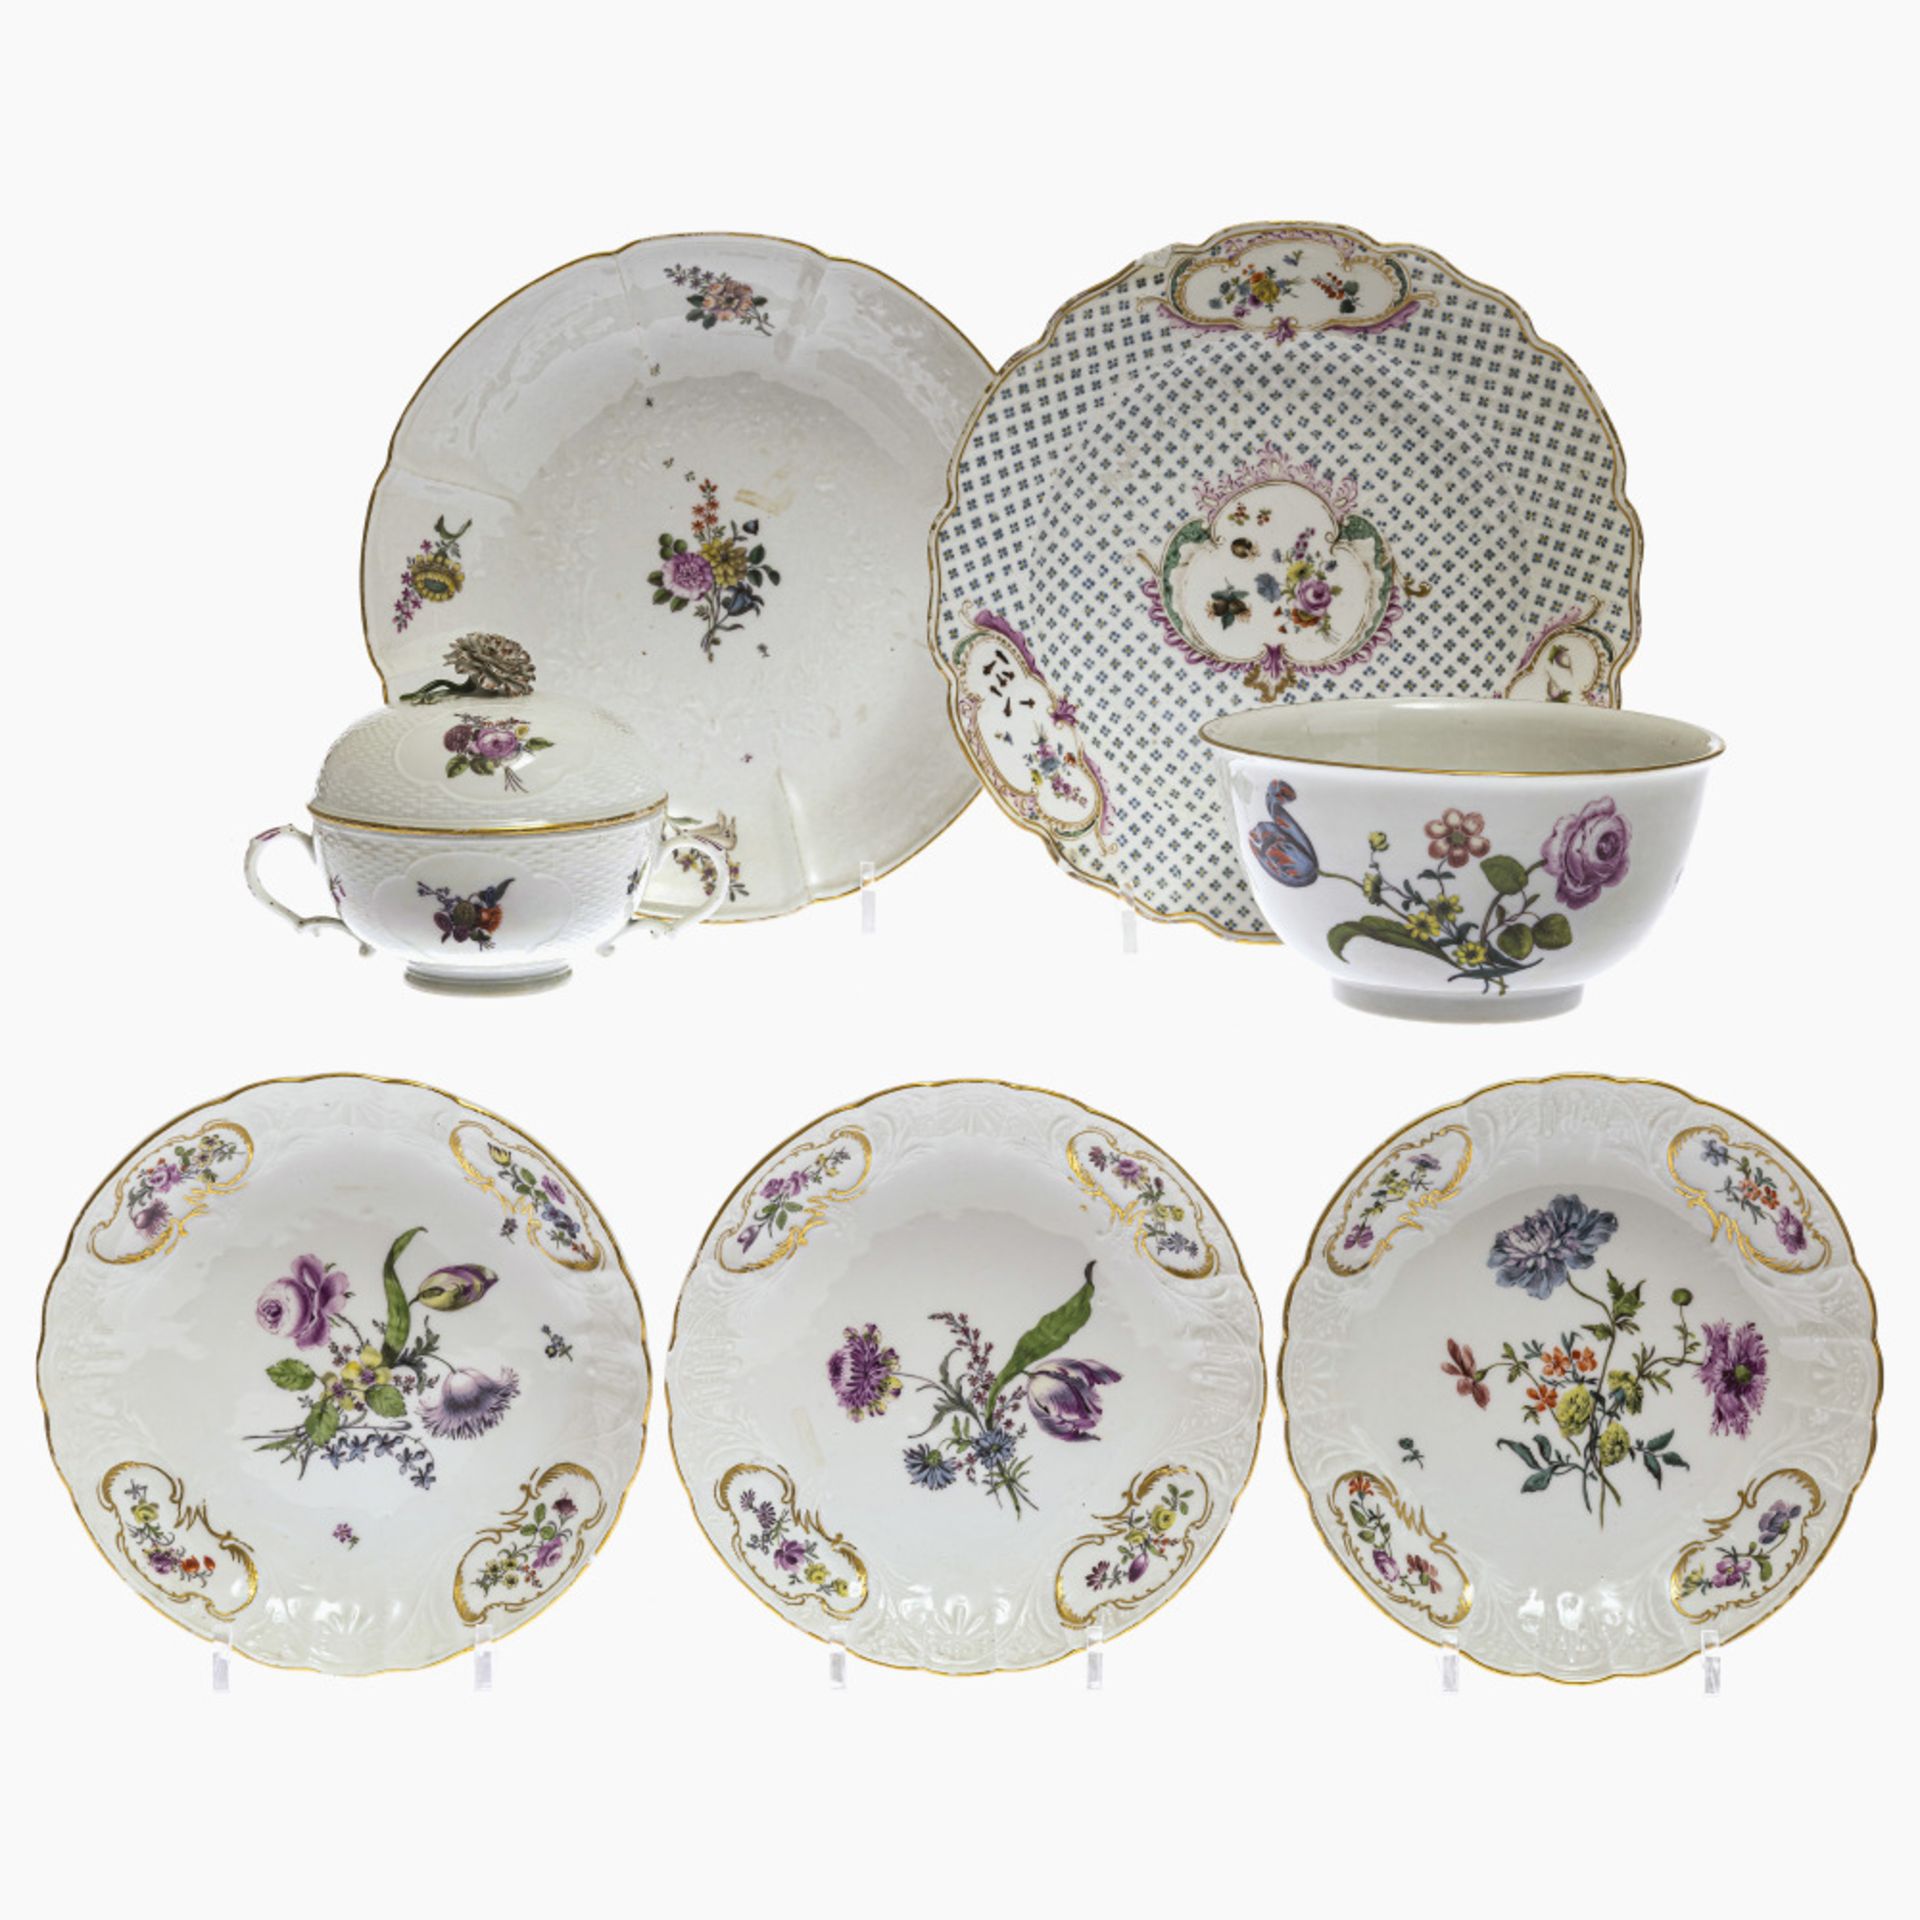 A bowl, sugar bowl and five plates - Meissen, 18th century